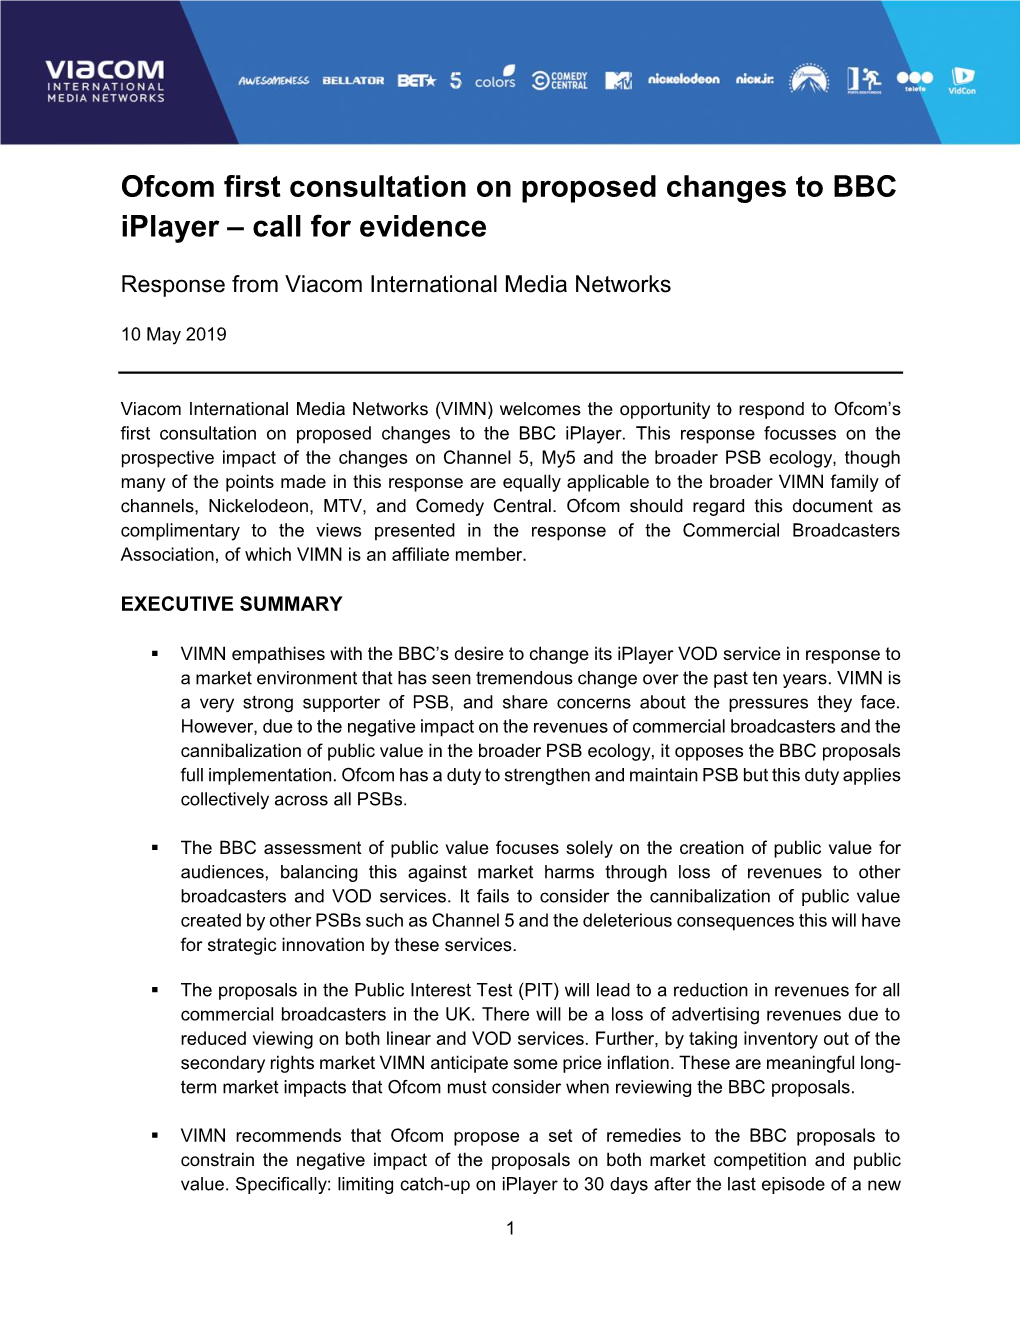 Ofcom First Consultation on Proposed Changes to BBC Iplayer – Call for Evidence